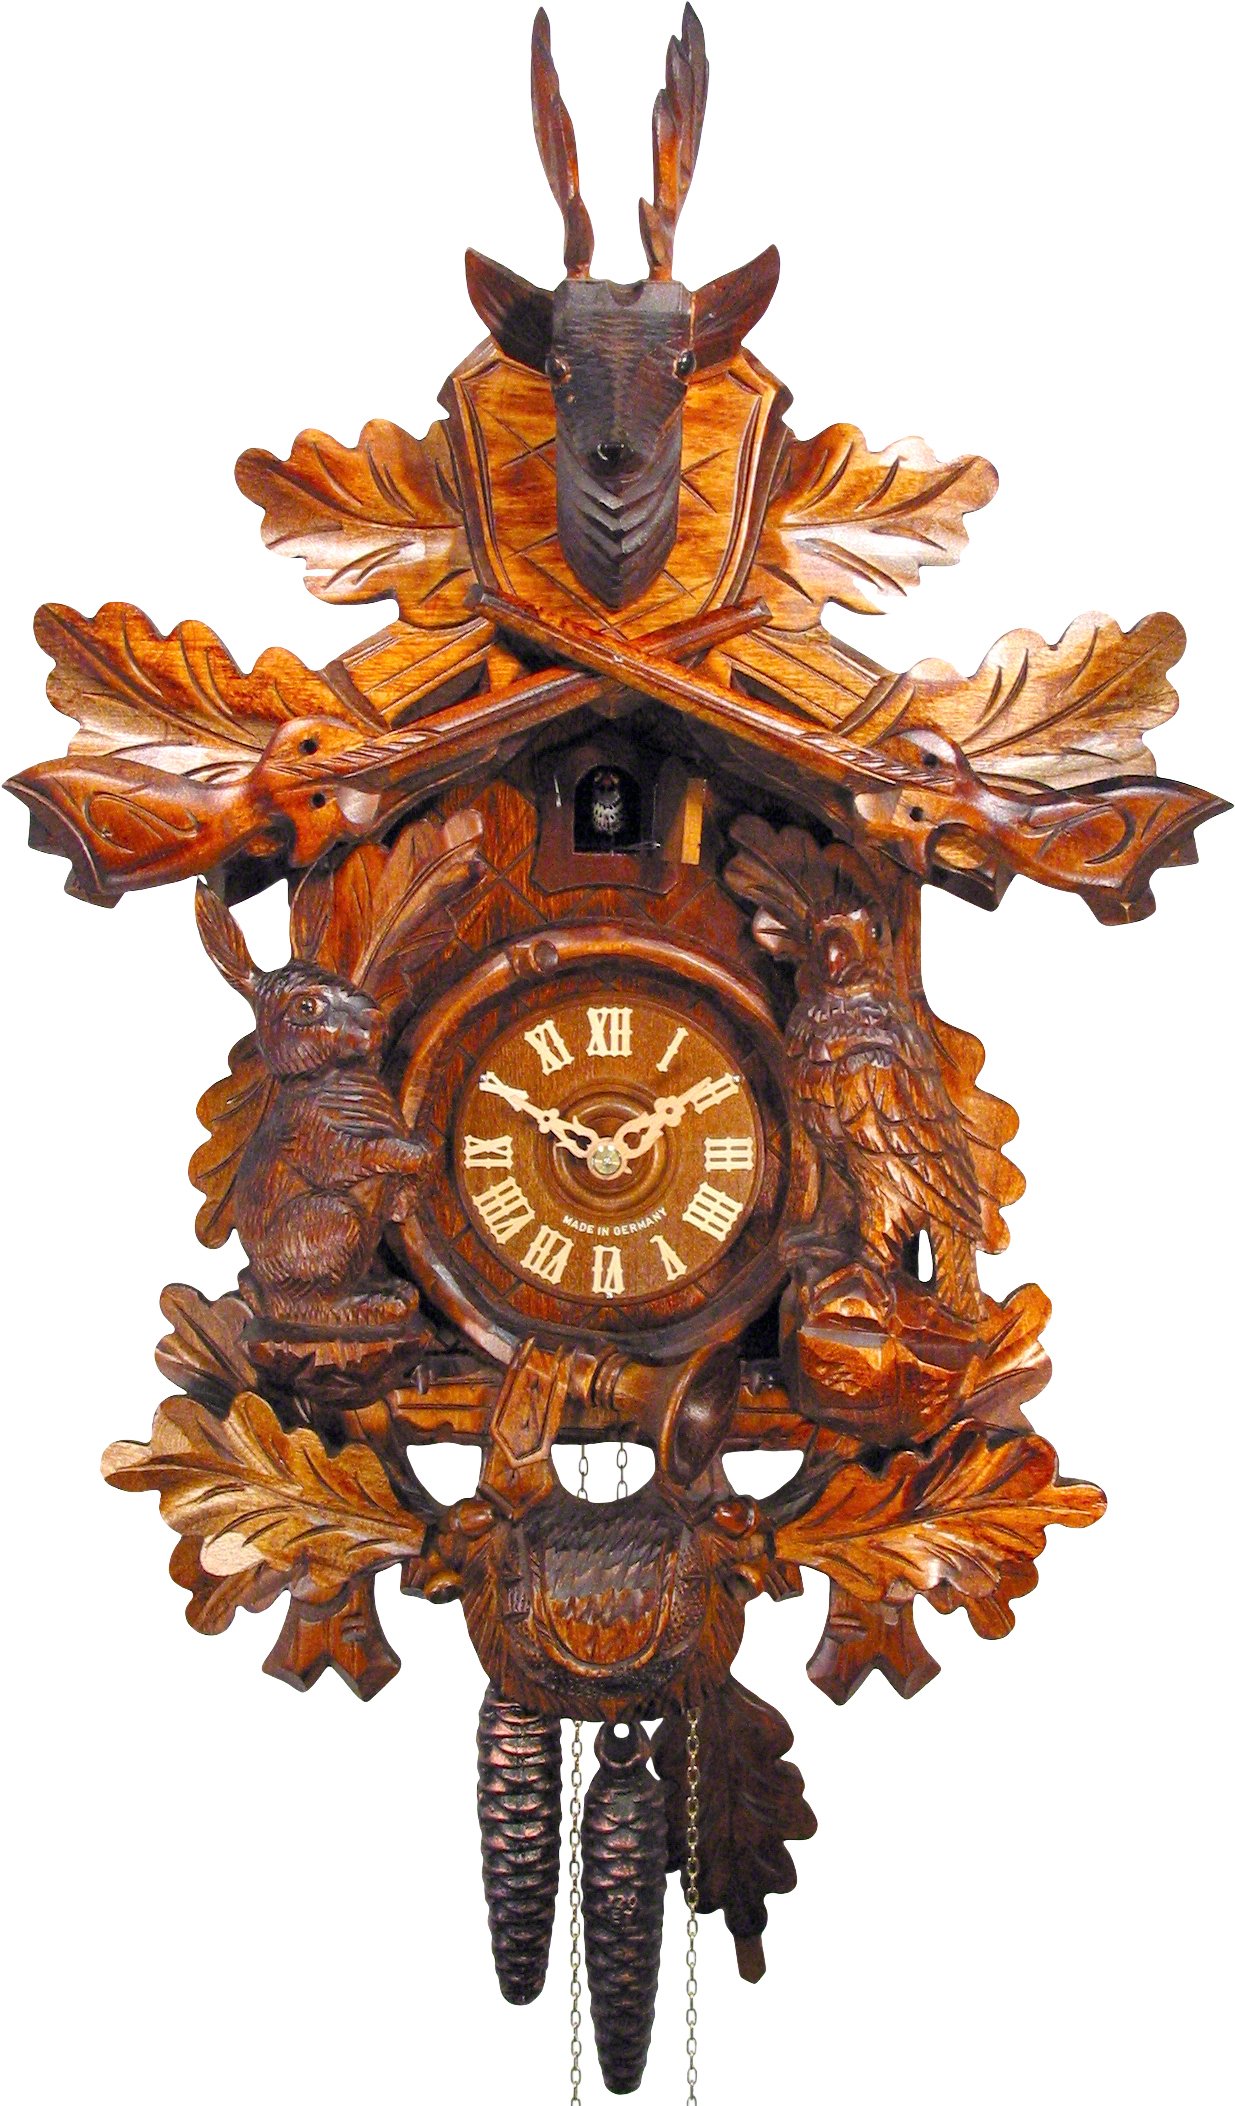 Cuckoo Clock Carved Style 1 Day Movement 46cm by August Schwer